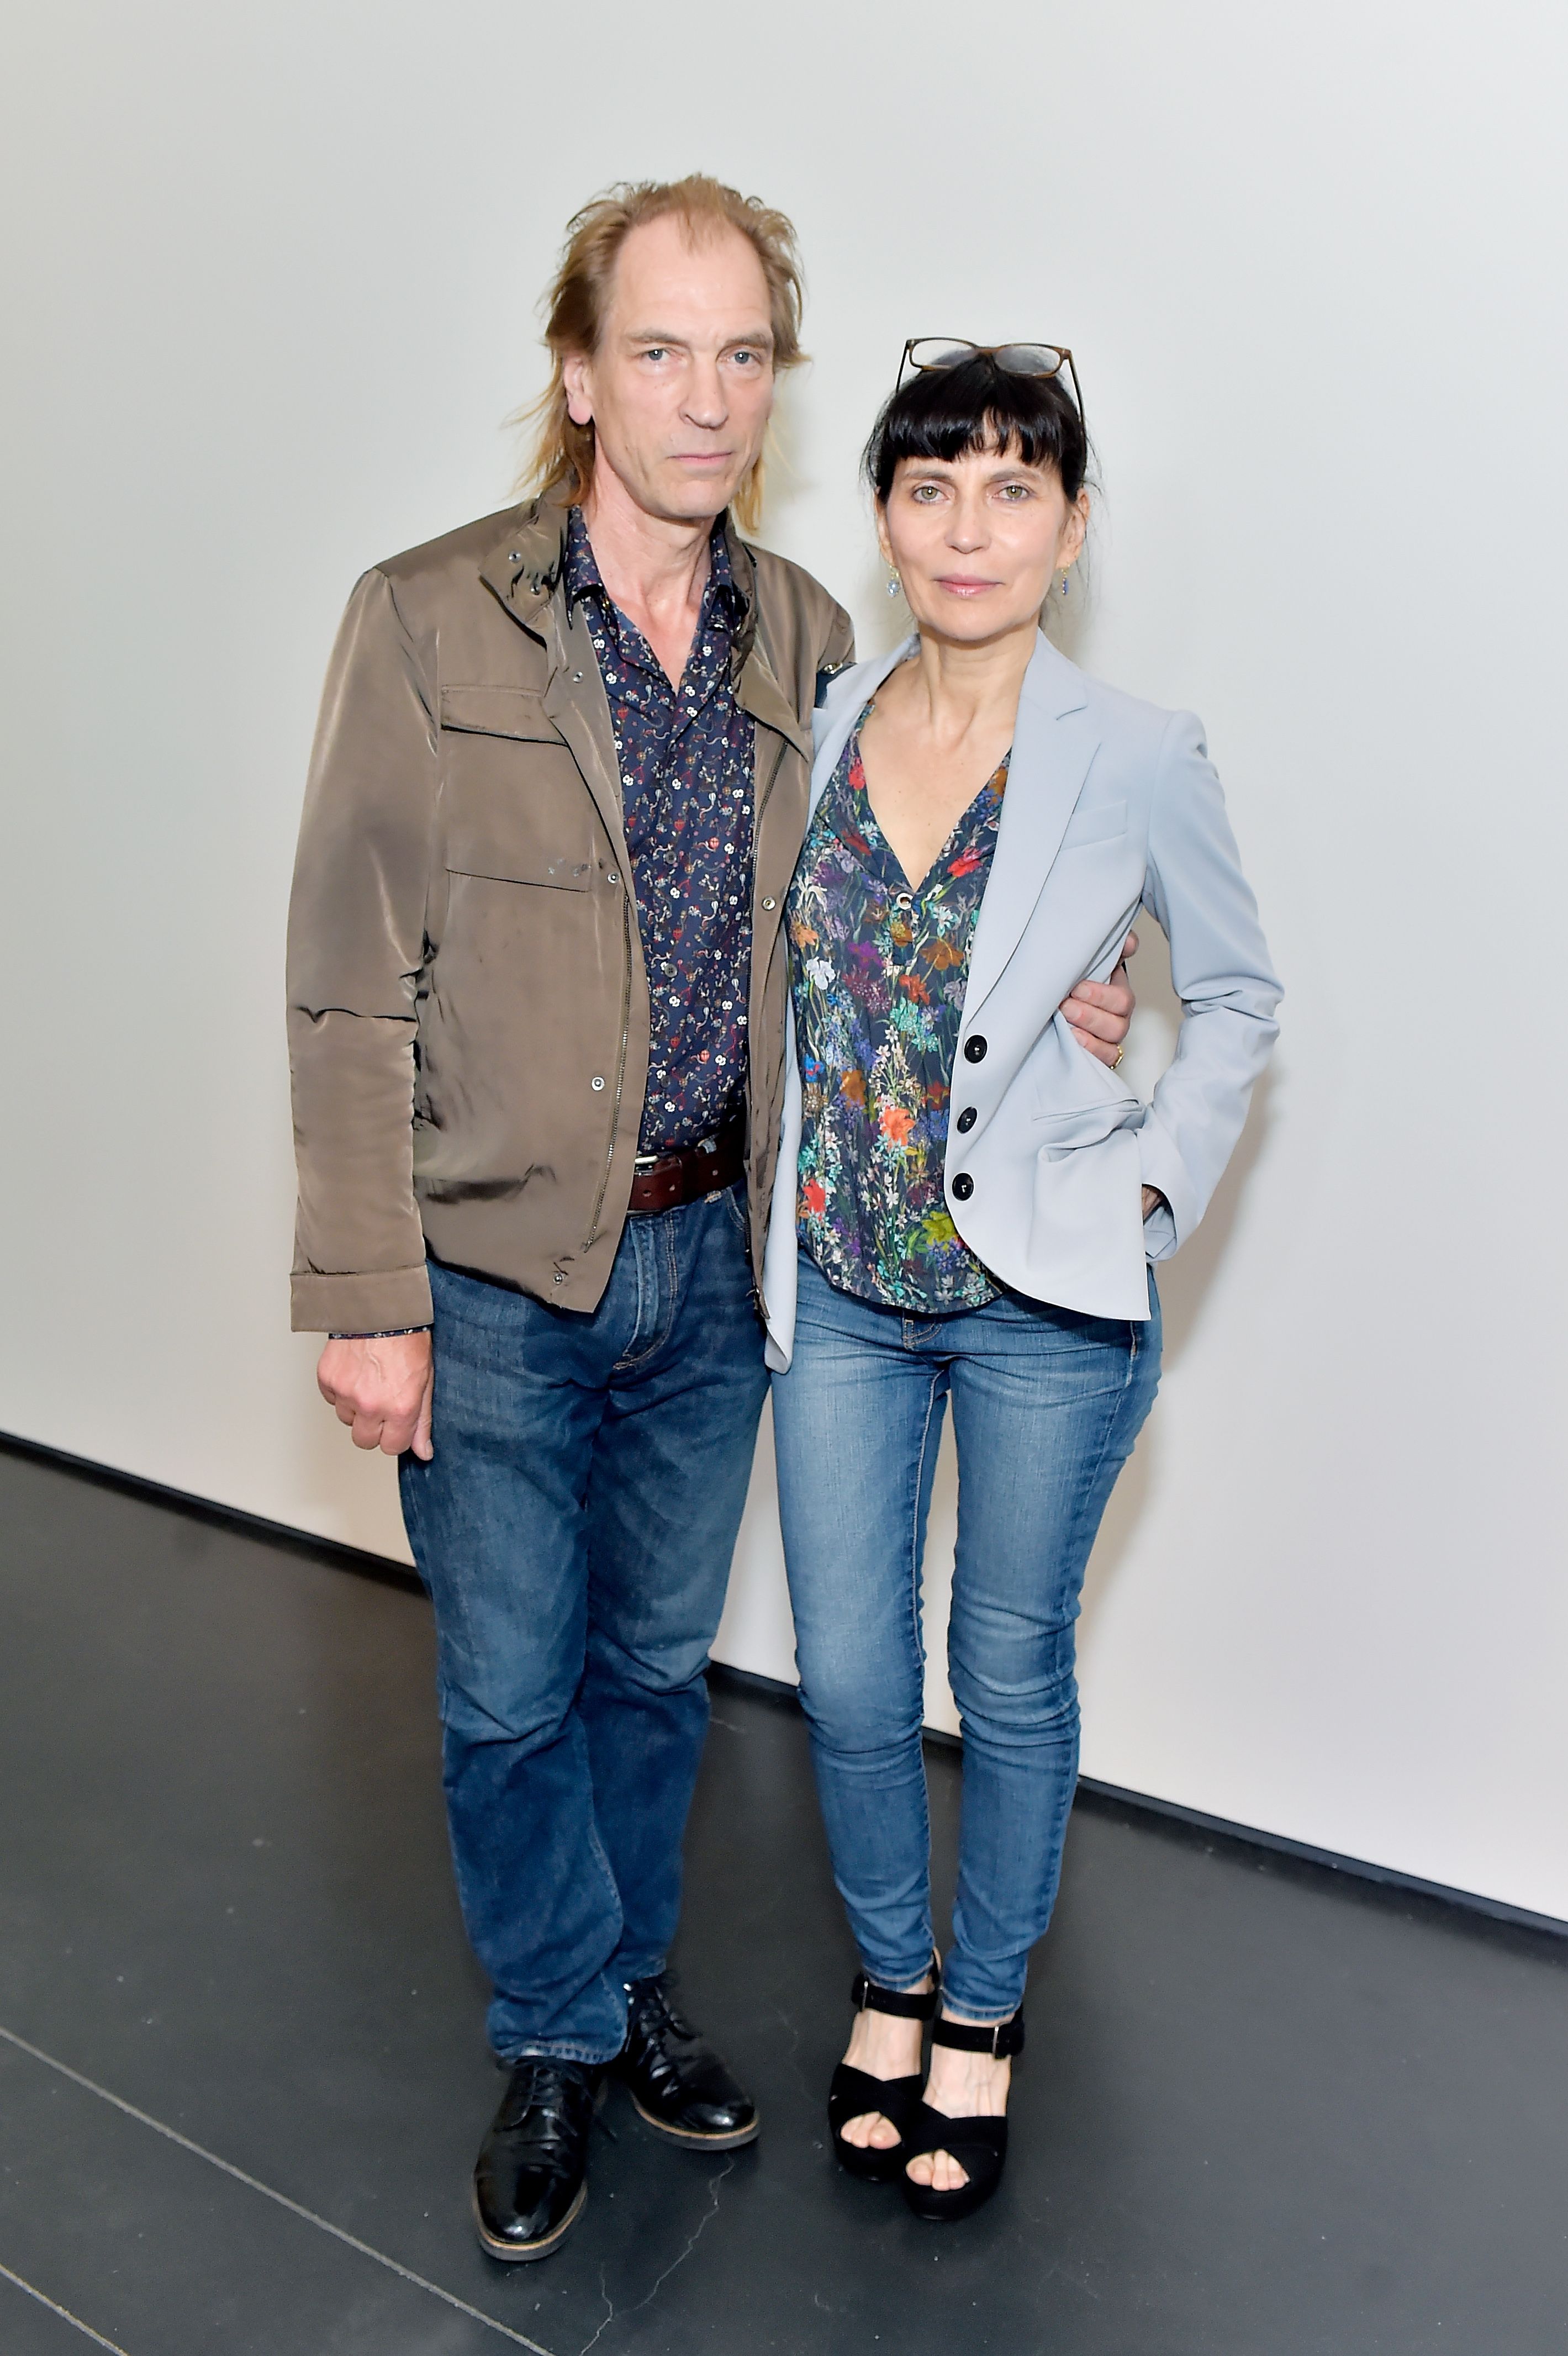 Julian Sands and Evgenia Citkowitz on June 6, 2018, in Los Angeles, California. | Source: Getty Images